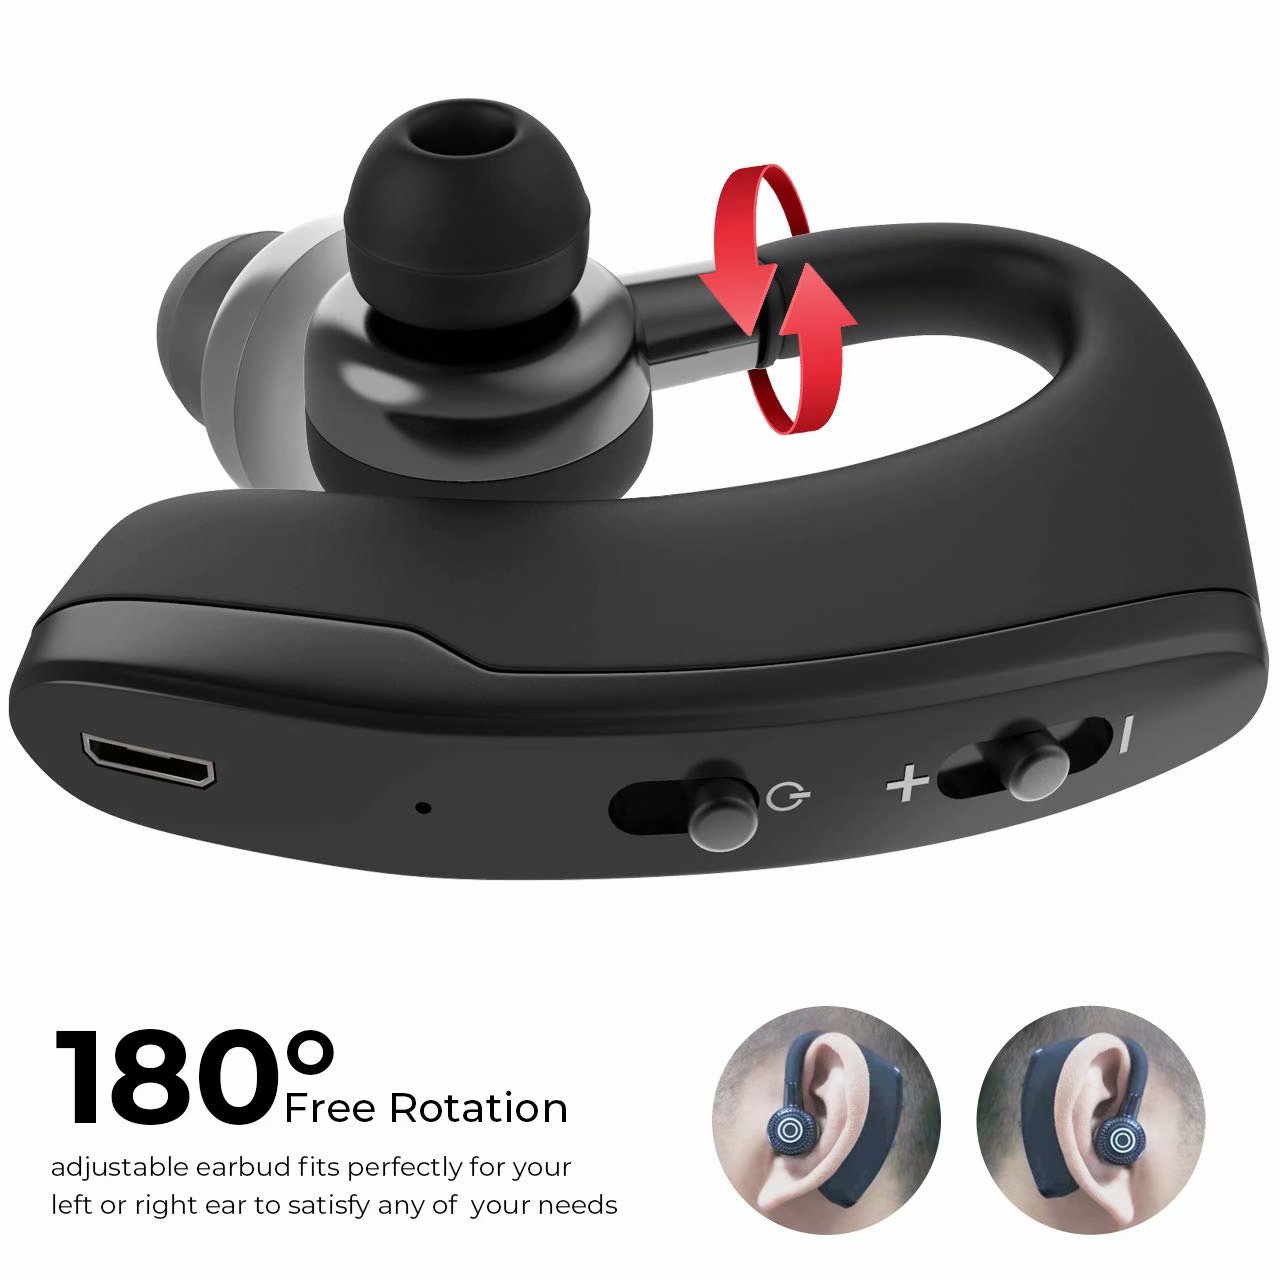 V9 Business Wireless CSR Headset/Earphone Voice Control V4.1 Phone Handsfree MIC Music for iPhone Huawei Samsung and Xiaomi with NFC Function - image 3 of 7